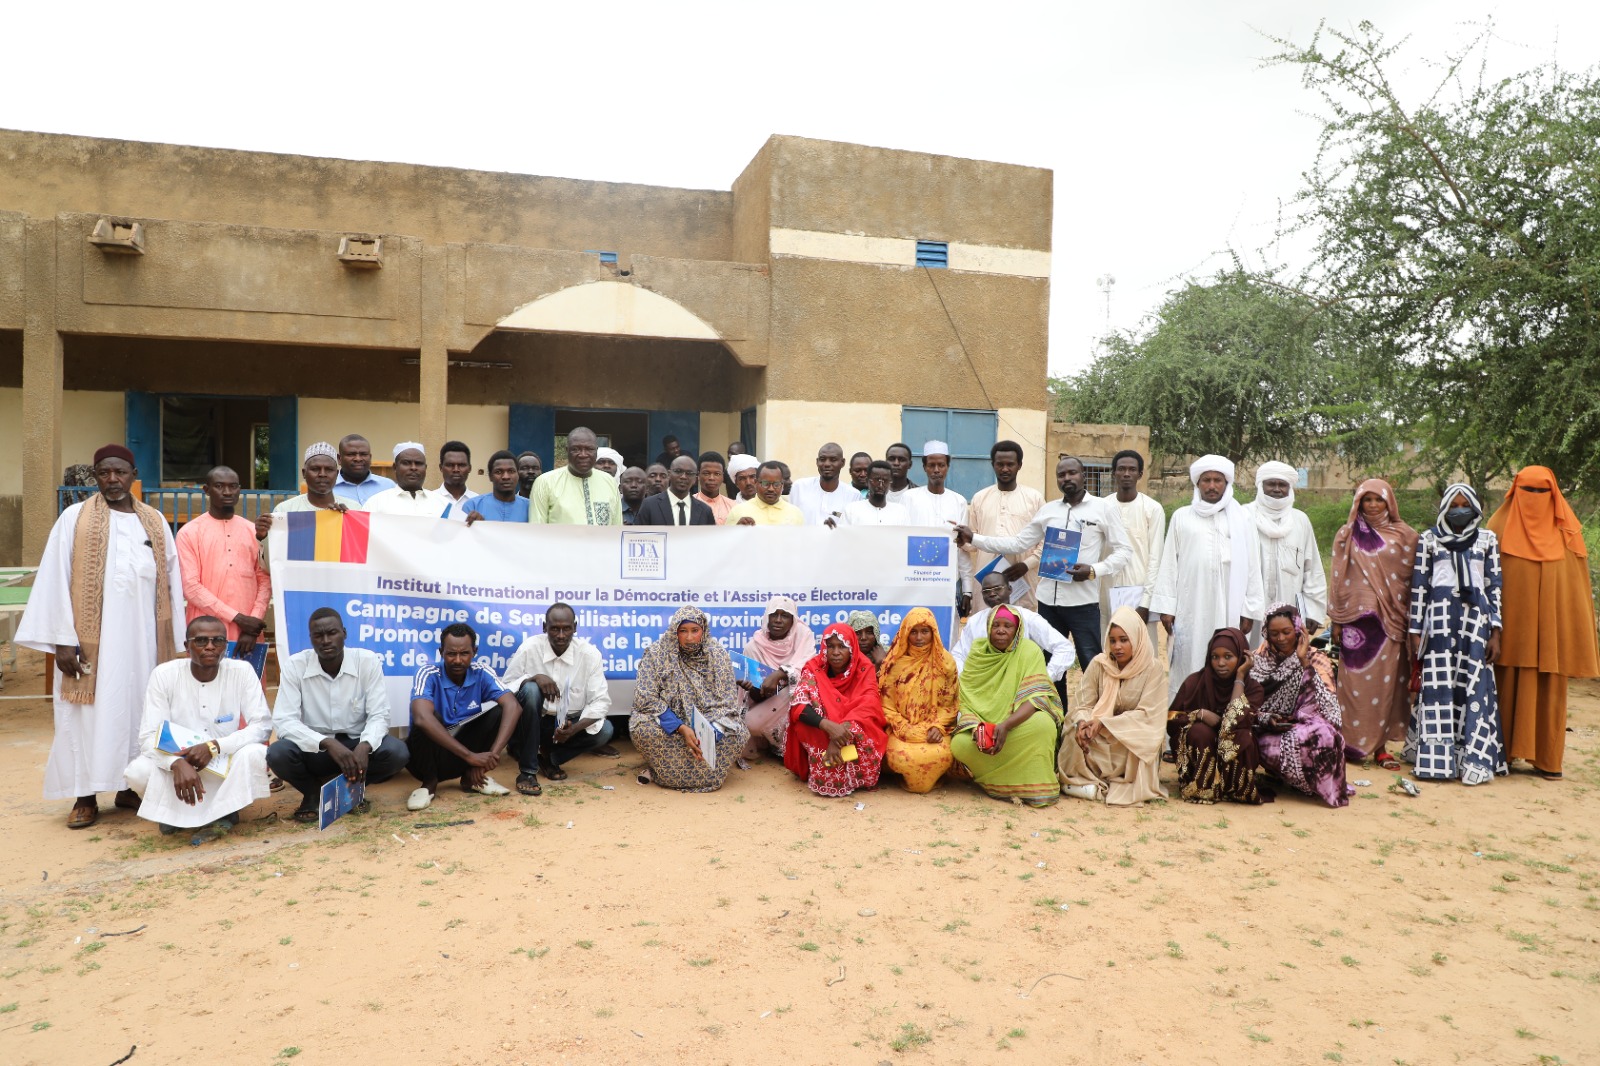 Group photo of Civil Society Organizations members in Adré, Chad.